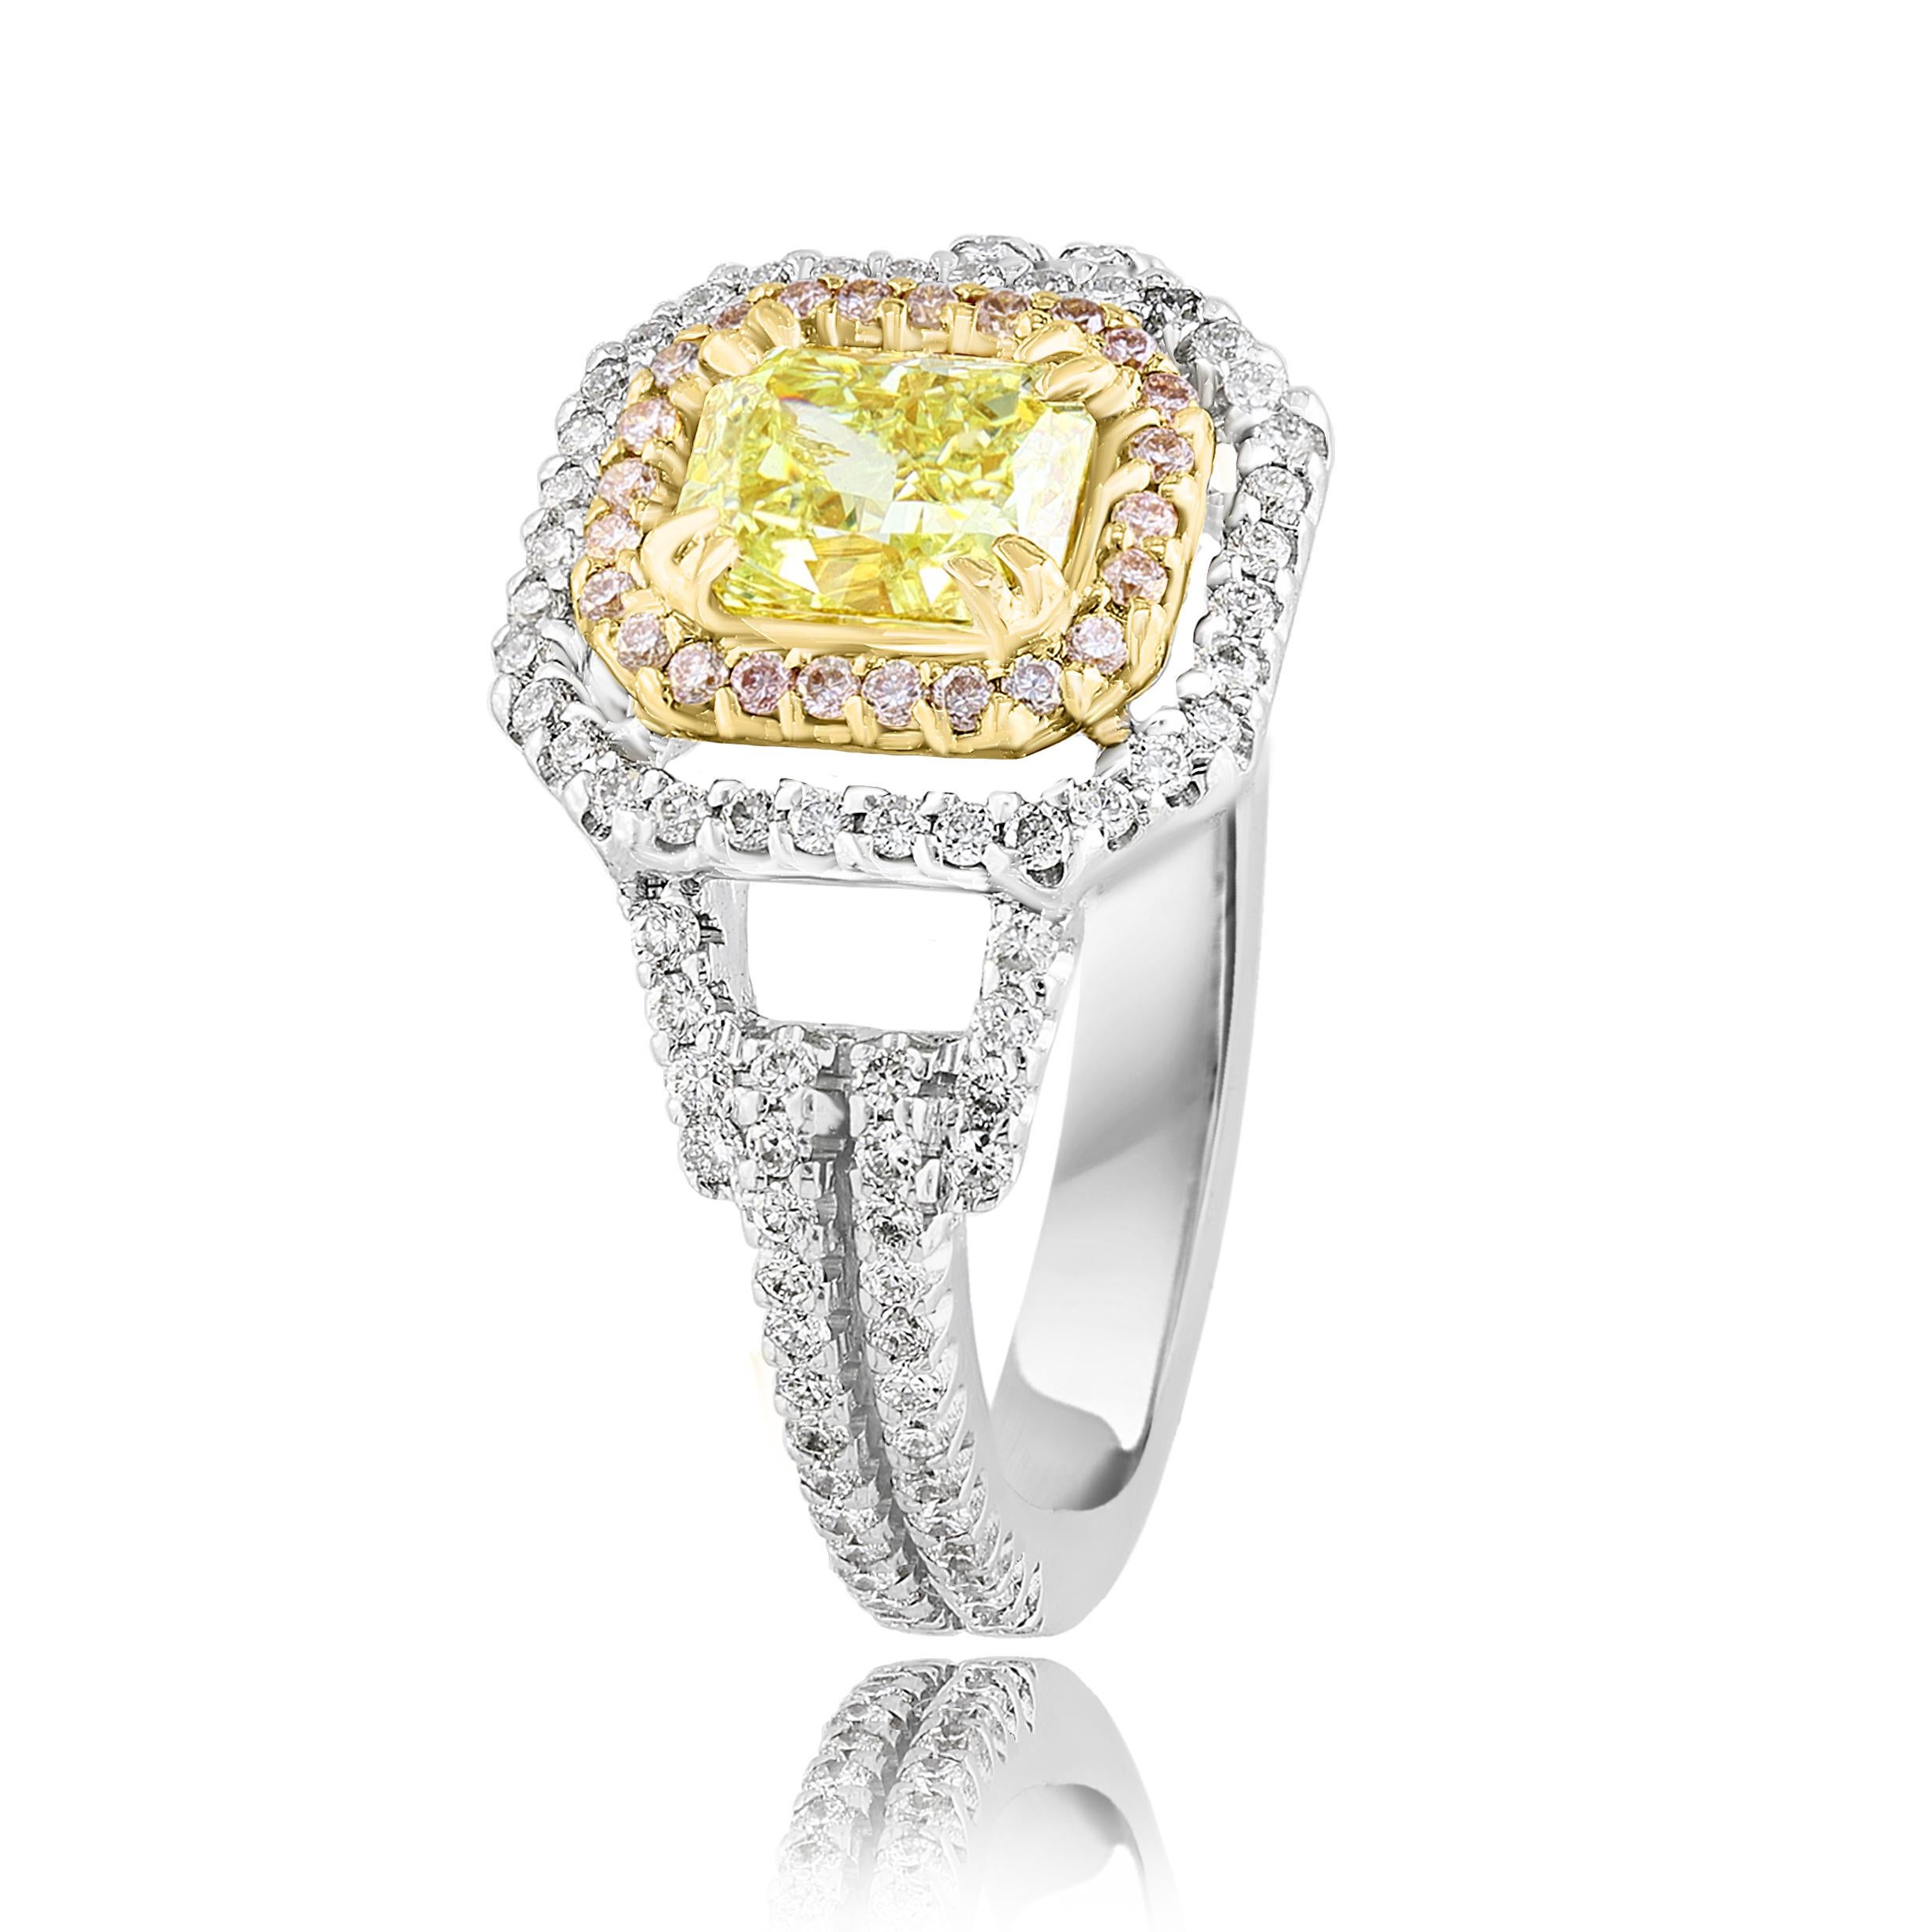 Modern 1 Carat Emerald Cut Yellow Diamond Ring in 18k Mix Gold For Sale